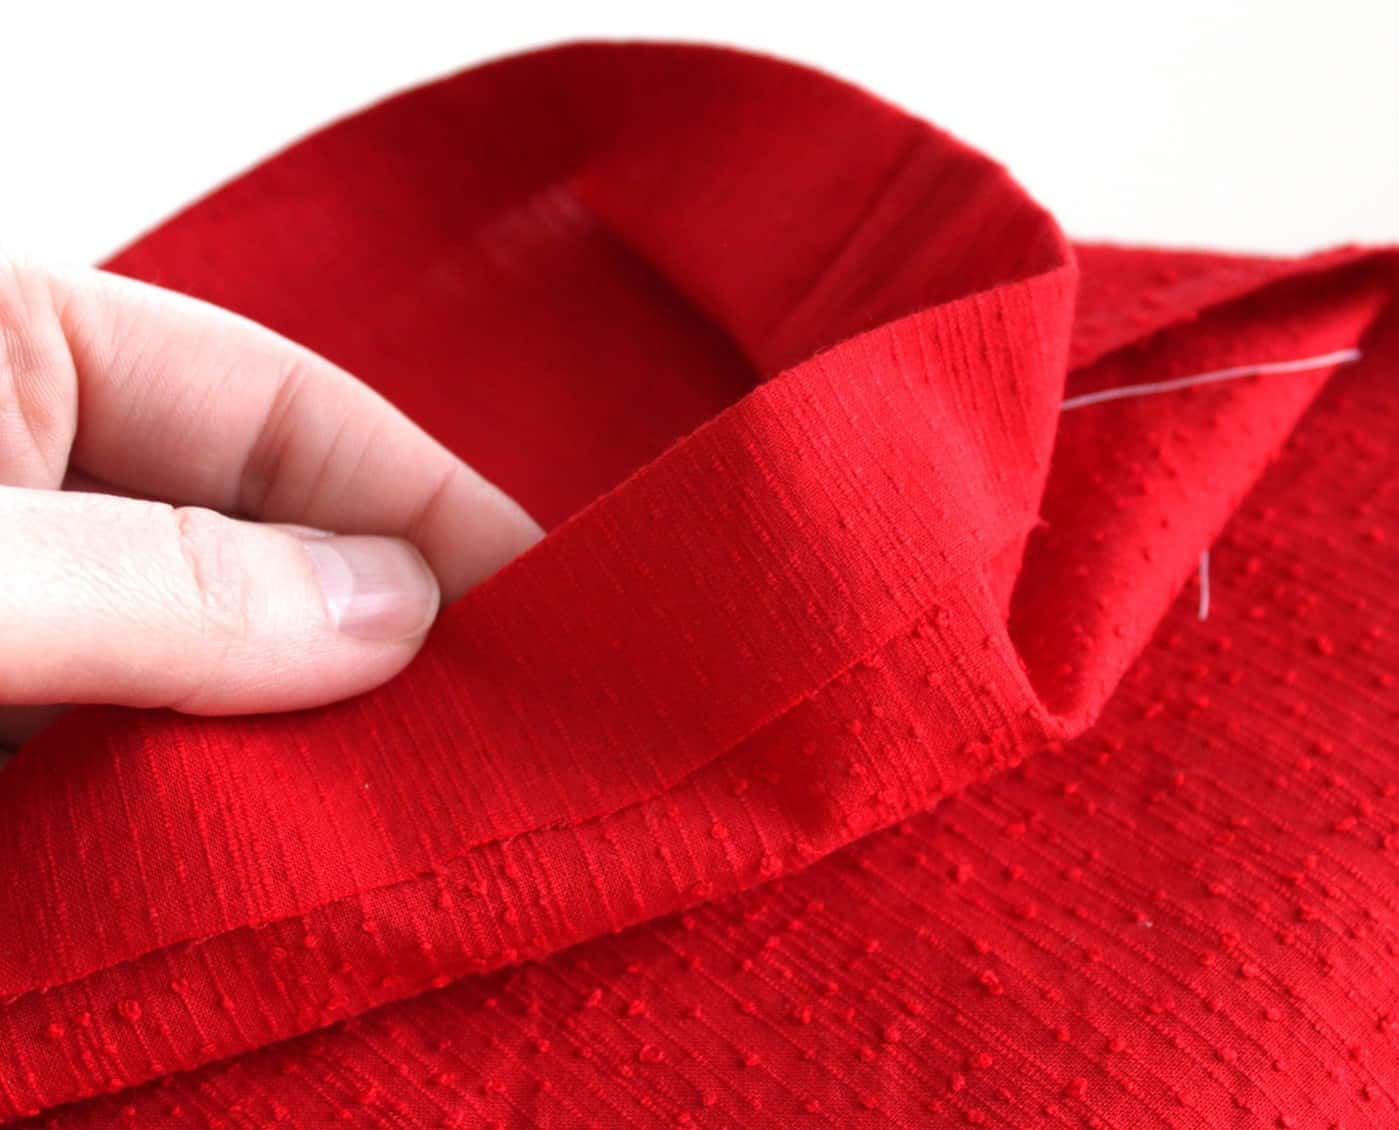 One inch edge of the red fabric folded over and ironed